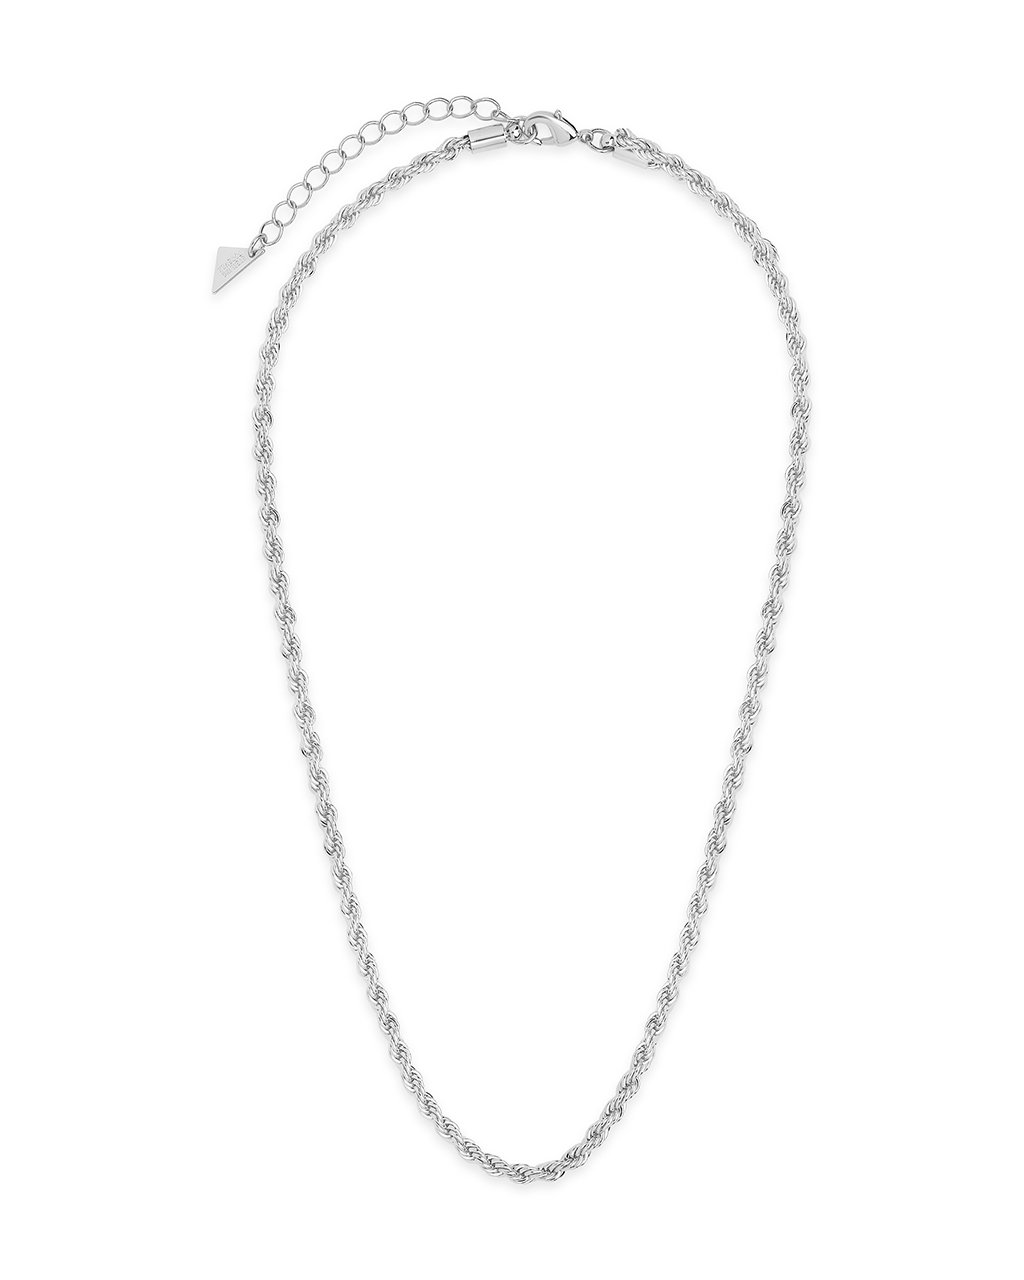 Rope Braided Twist Chain Necklace Sterling Forever 